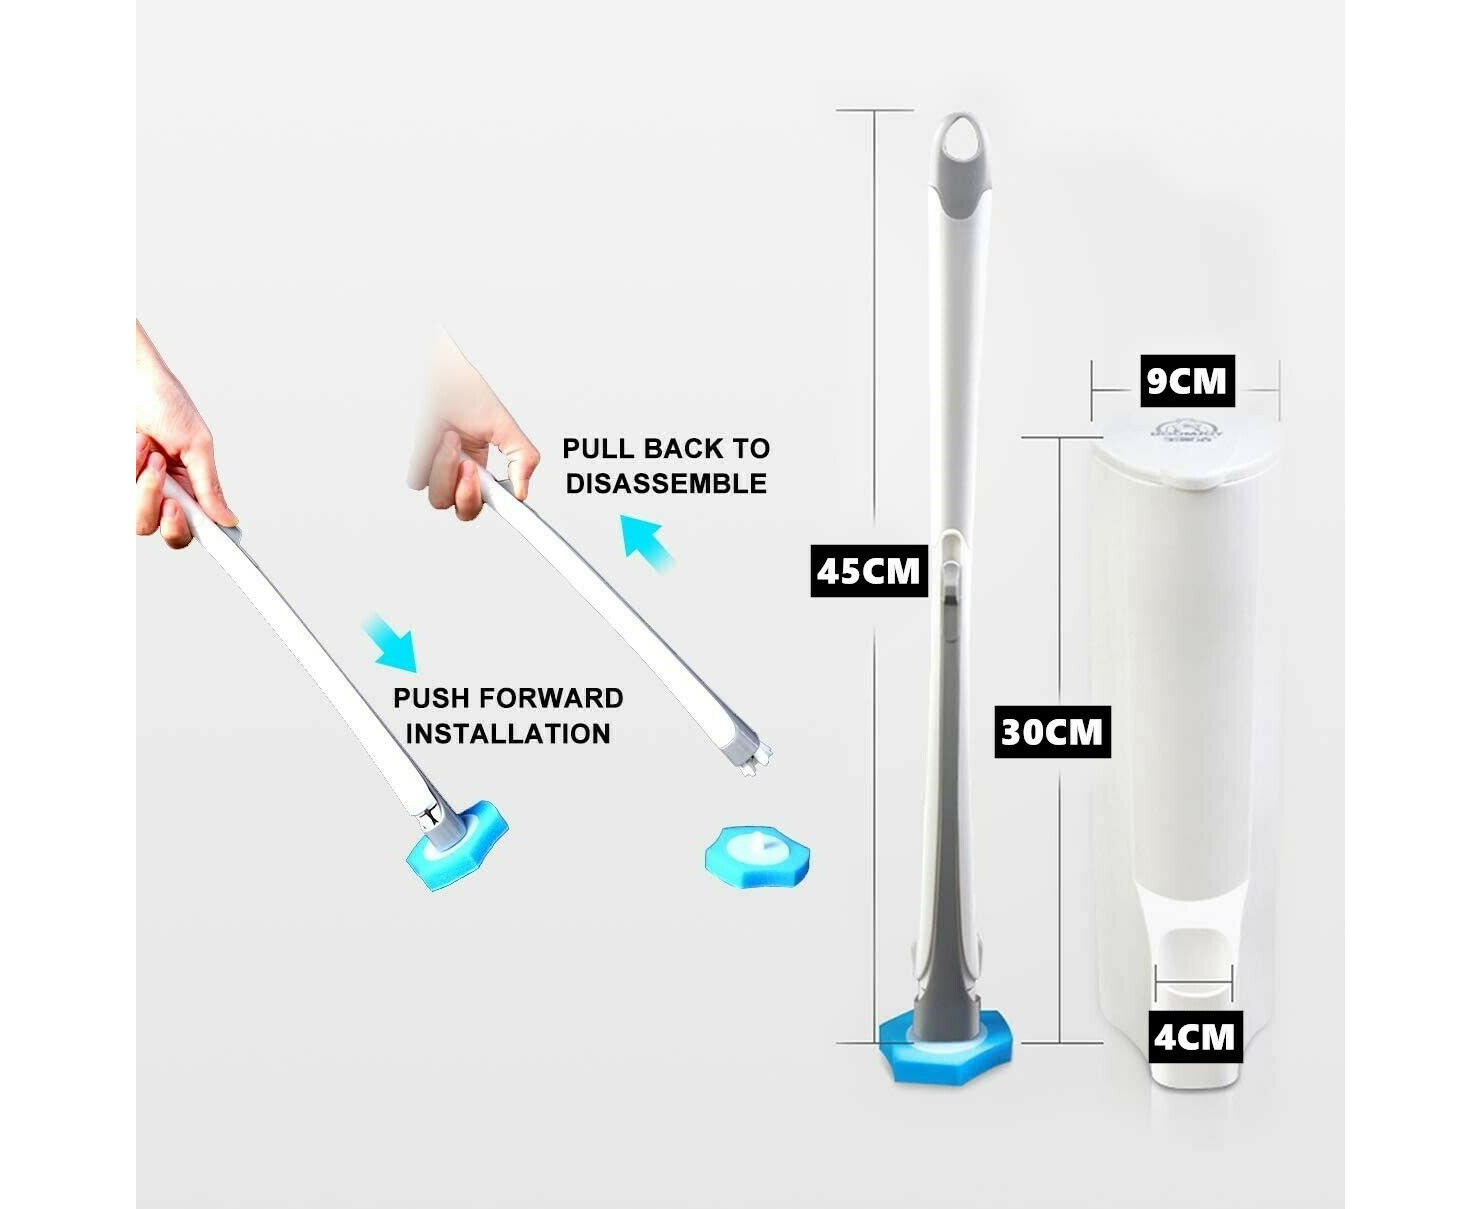 Superio Toilet Brush and Holder,Toilet Bowl Cleaning System with Scrubbing  Wand, Under Rim Lip Brush and Storage Caddy for Bathroom, White and Blue